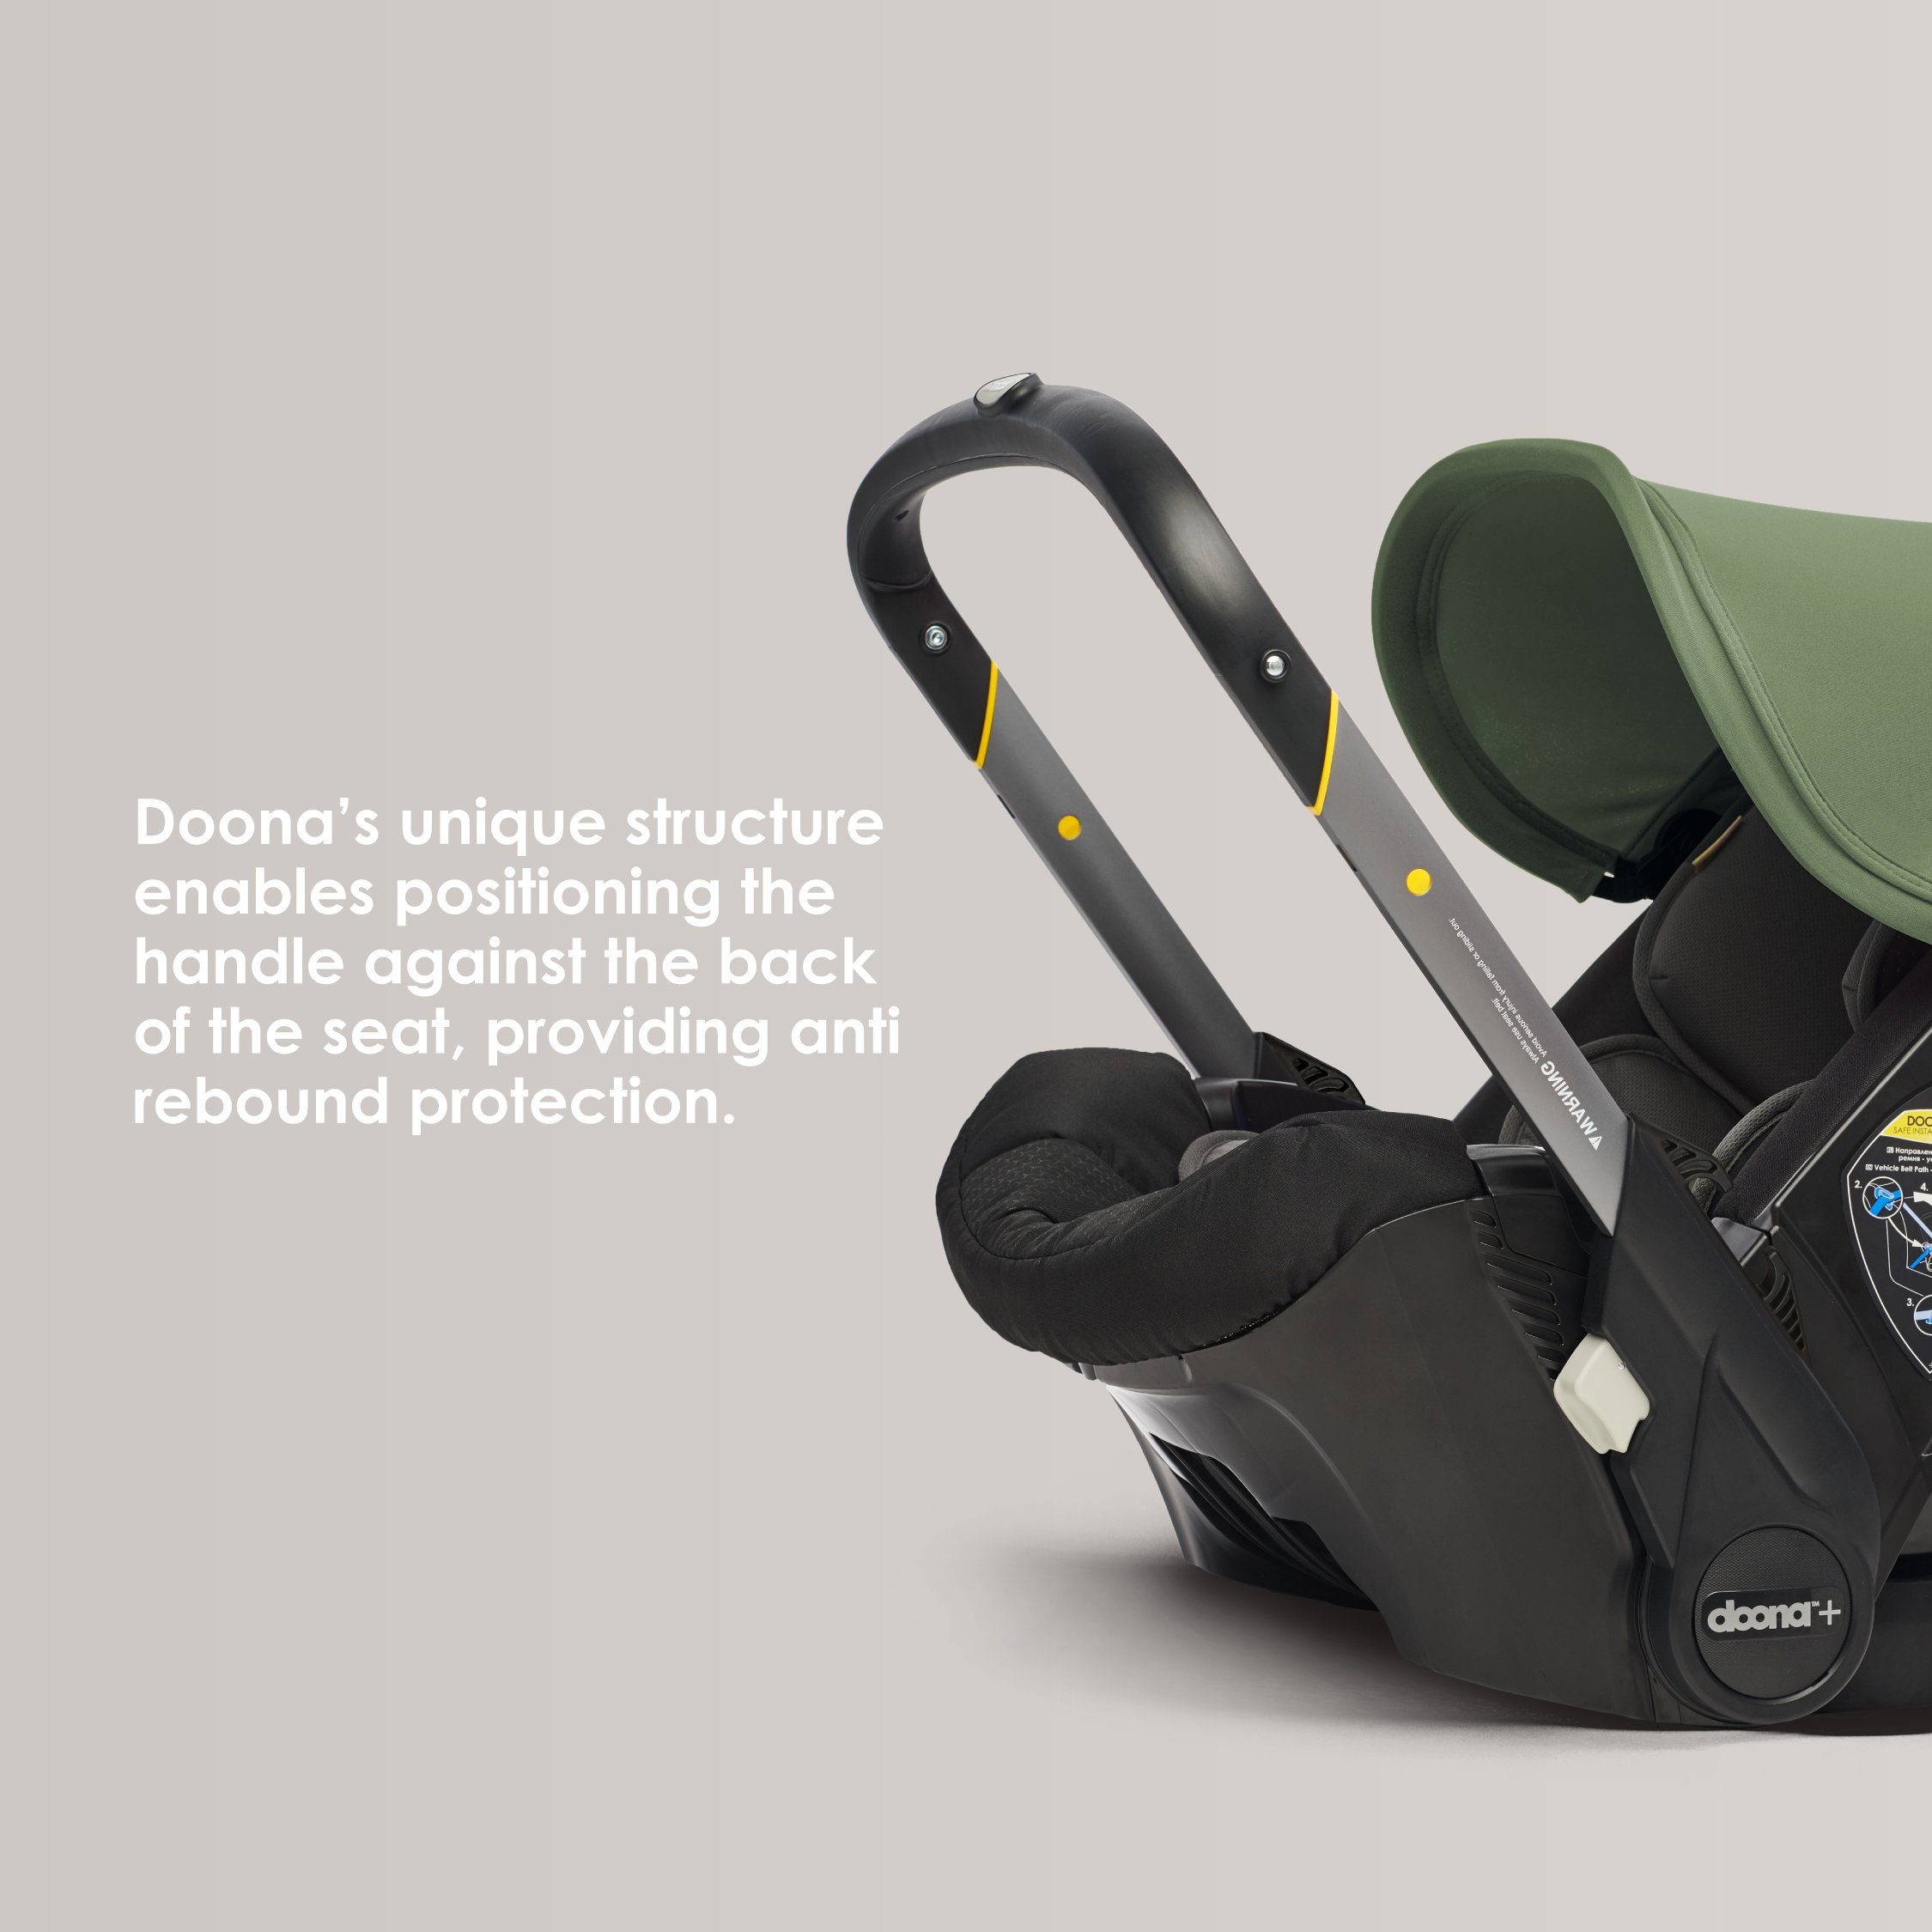 Doona Car Seat & Stroller Collections